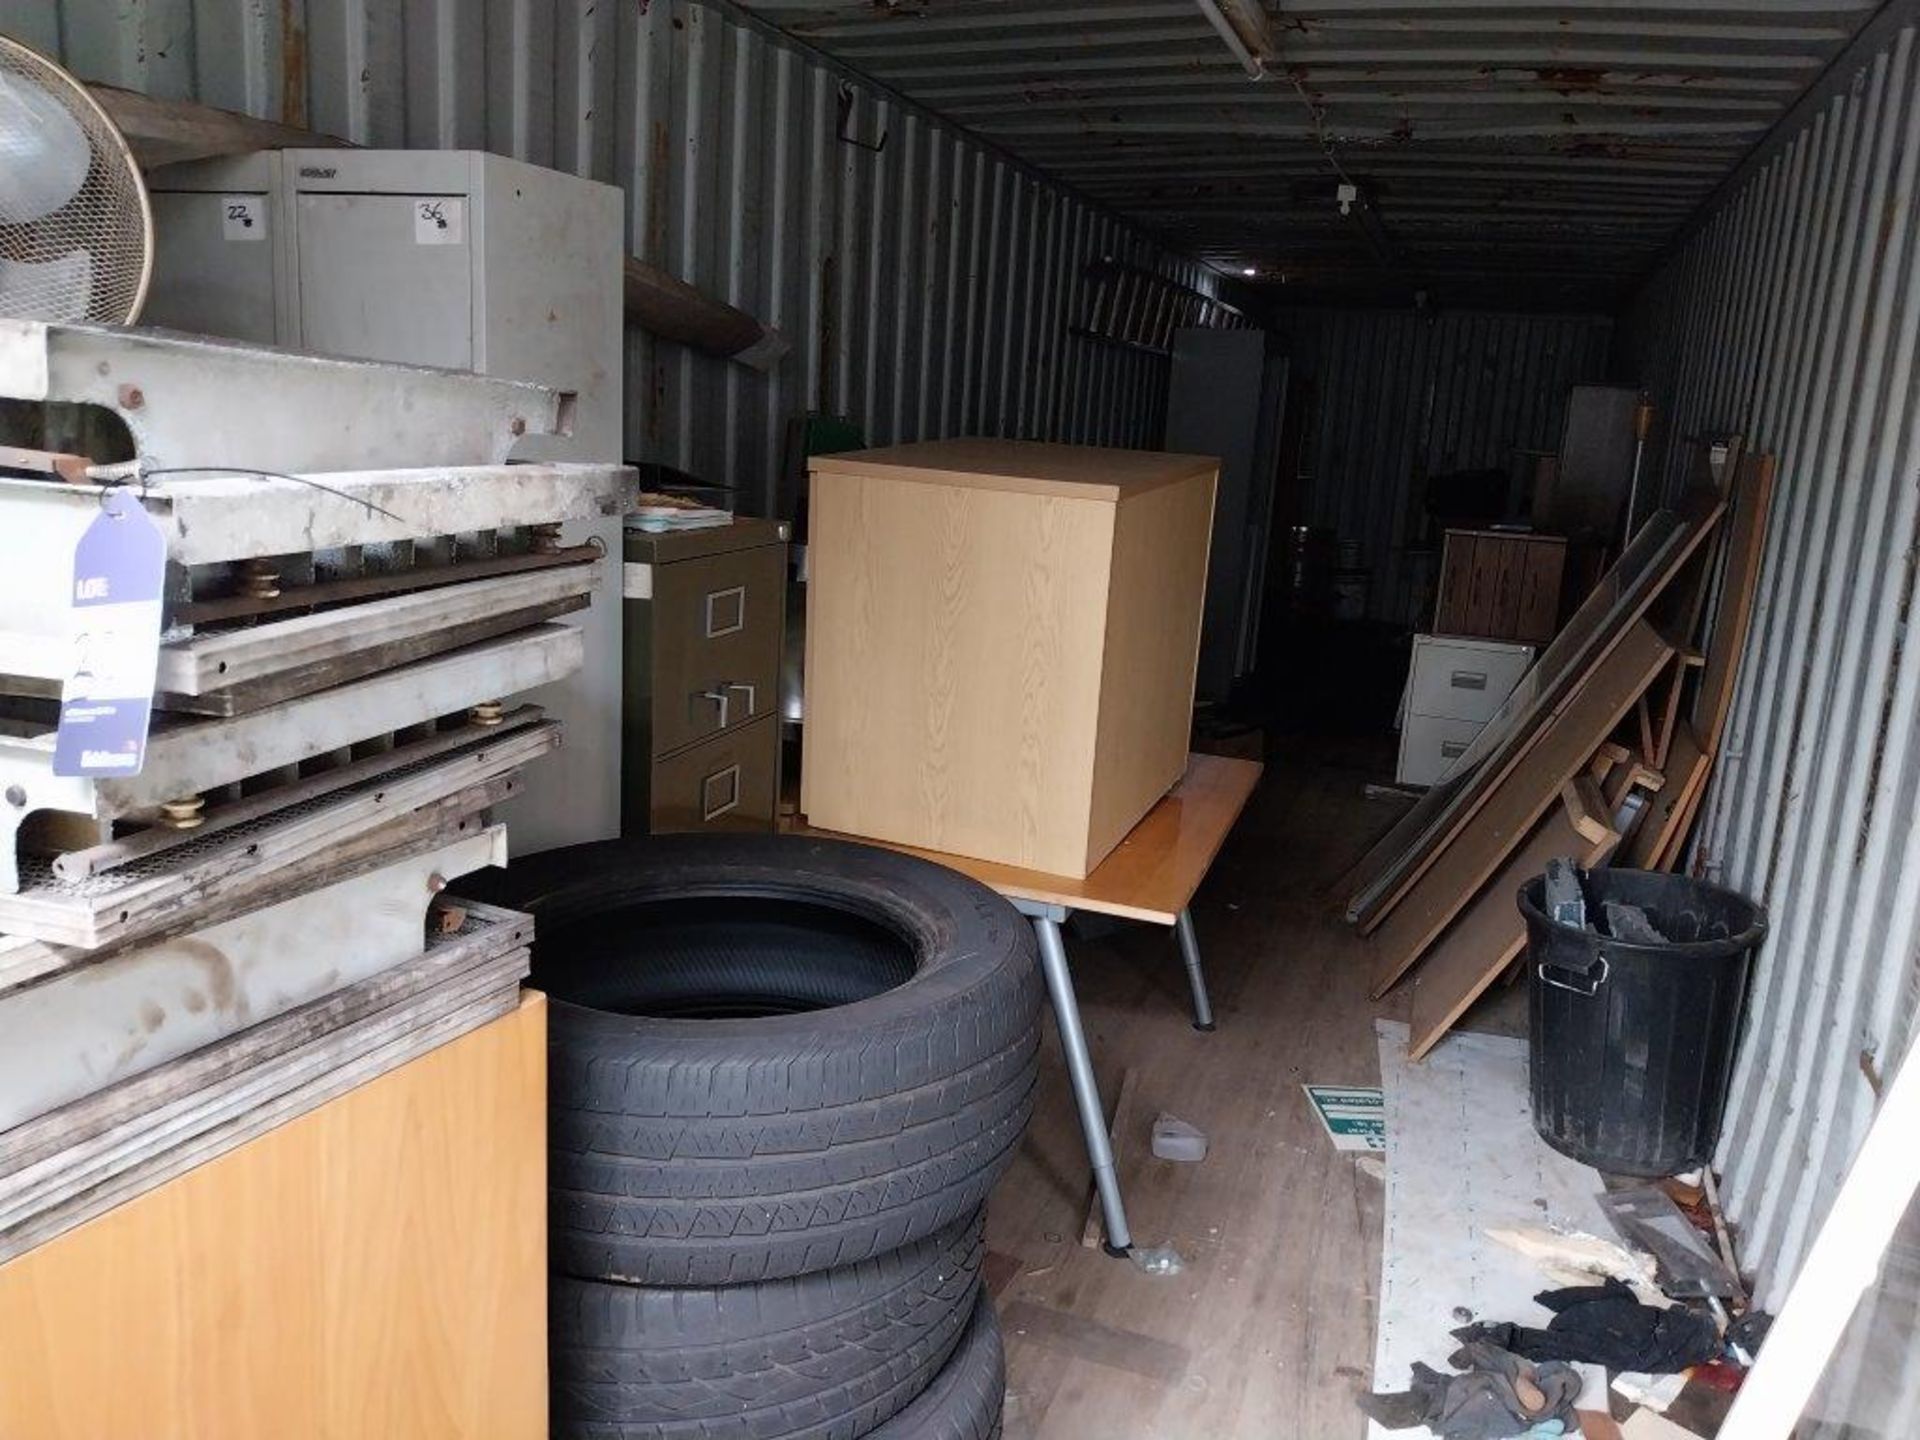 Remaining contents of container to include furniture, filing cabinets, tyres etc.